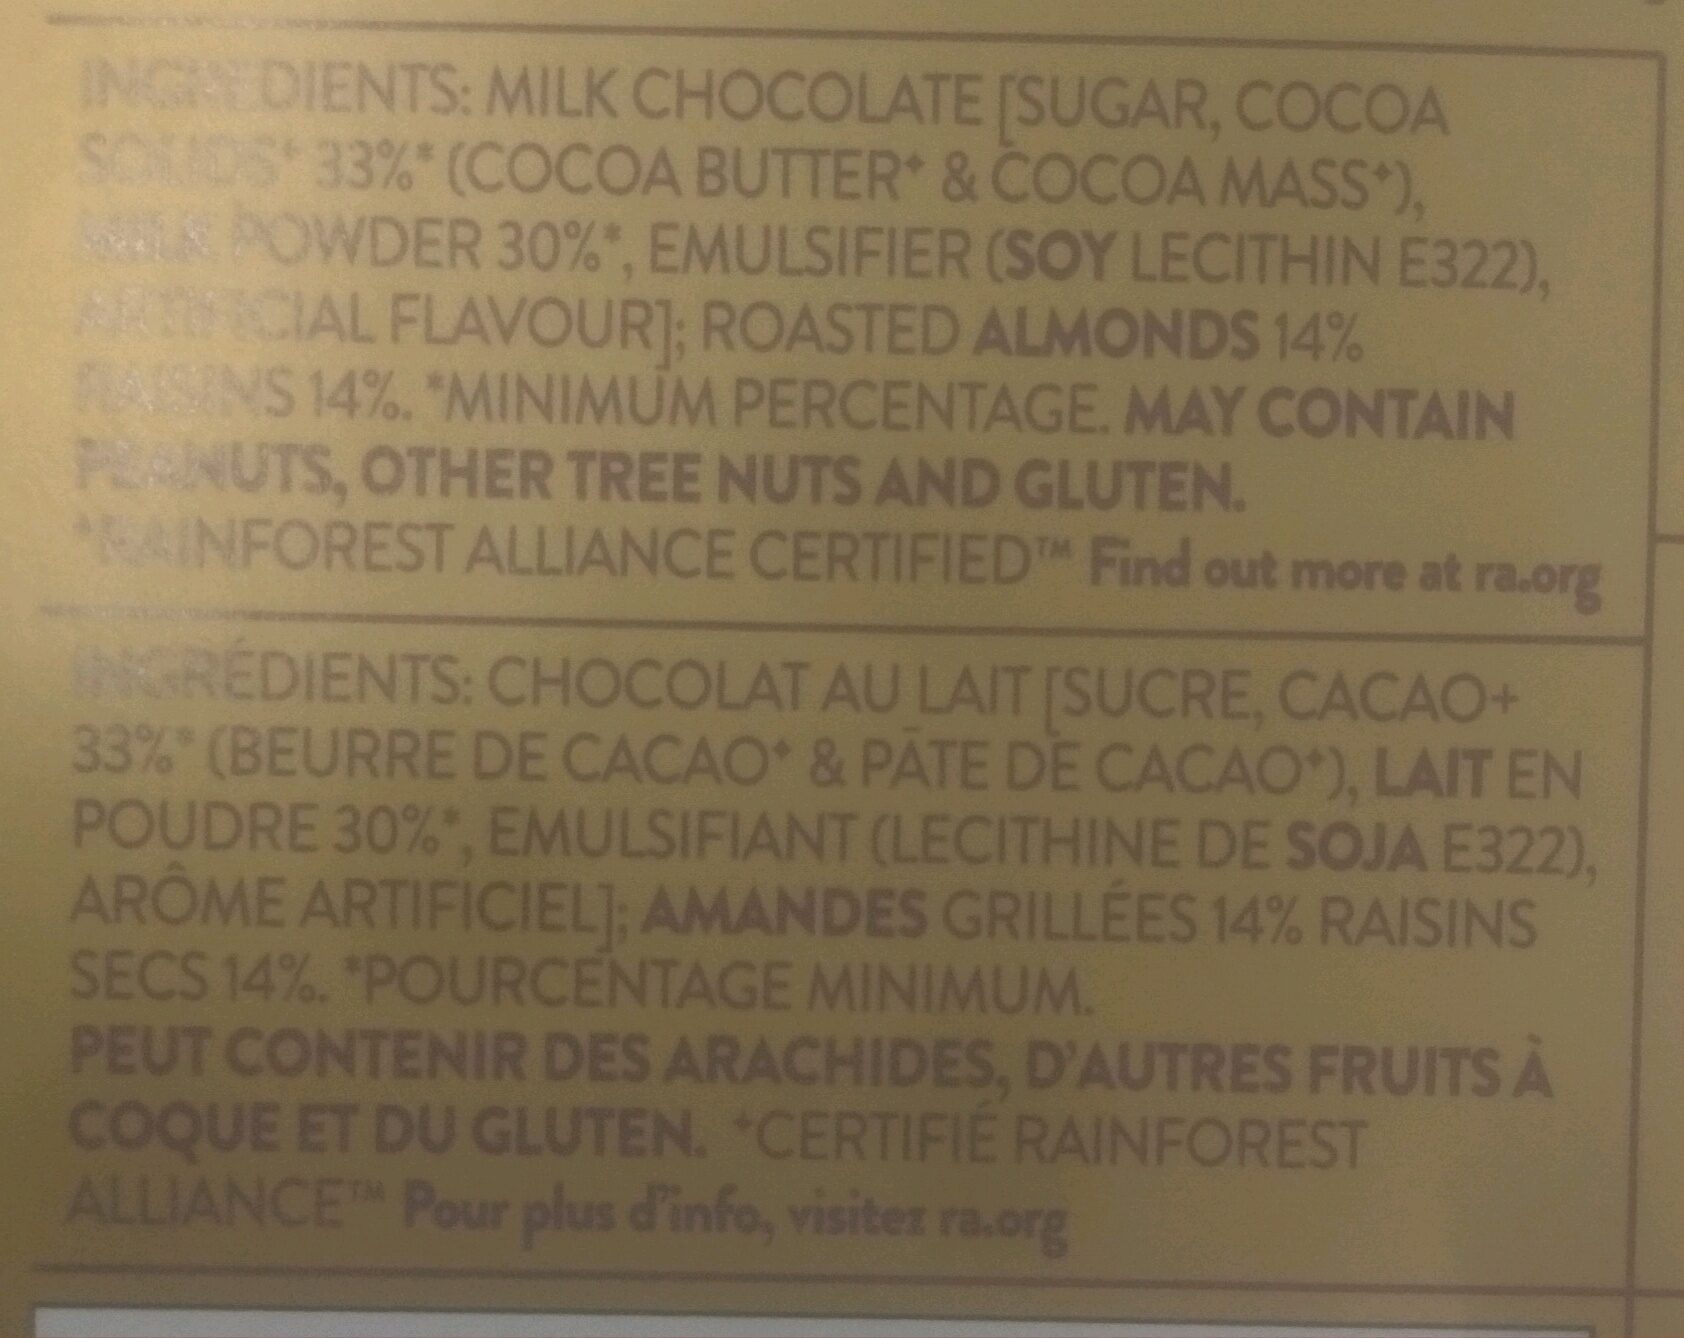 33% Cocoa Fruit and Nut Milk Chocolate Bar - Ingrédients